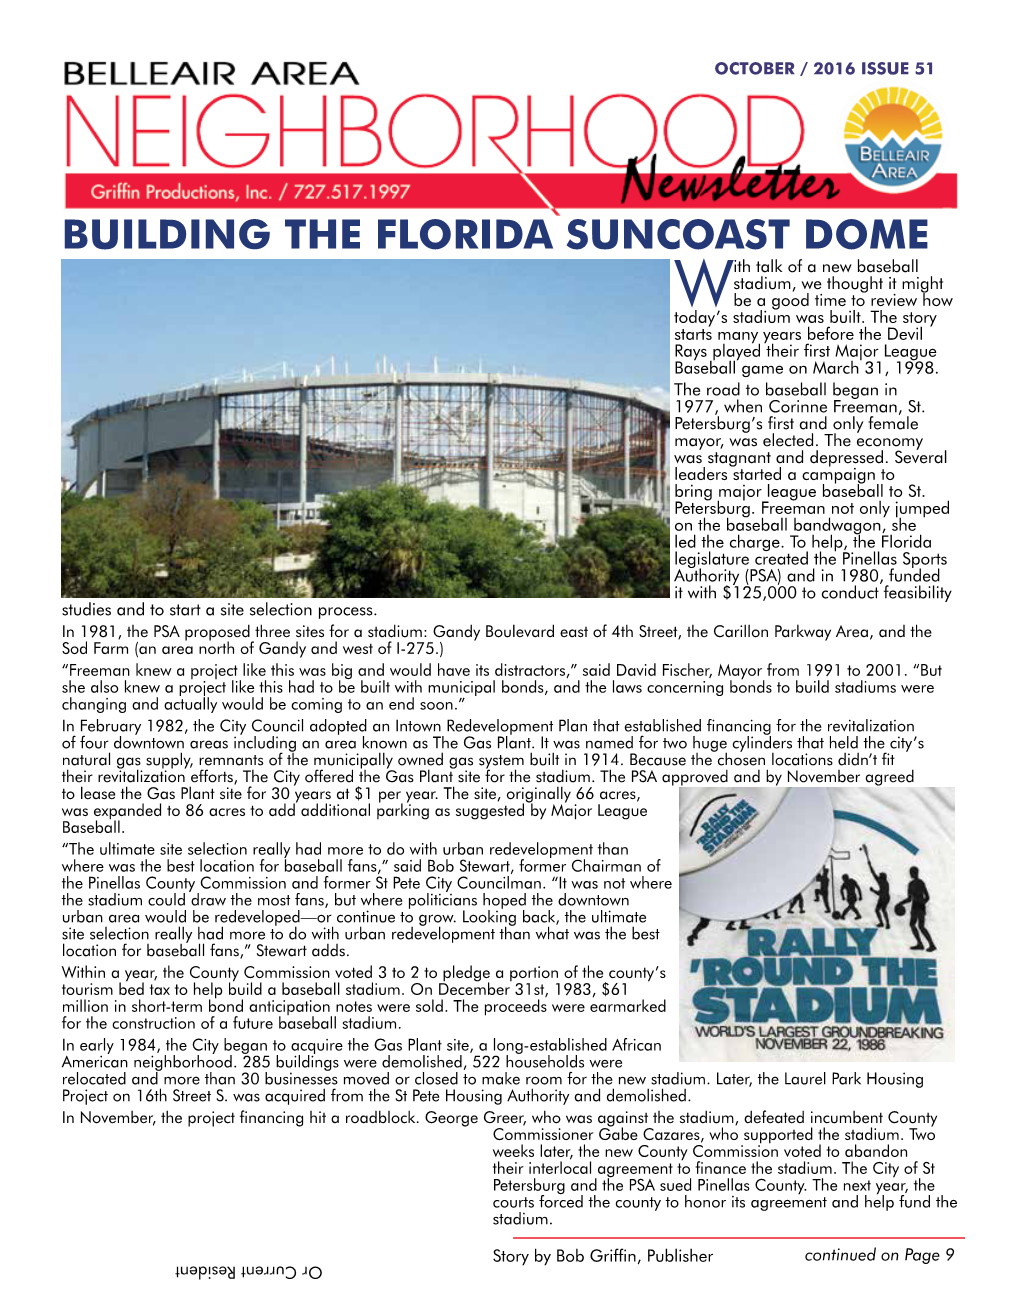 BUILDING the Florida Suncoast Dome Ith Talk of a New Baseball Stadium, We Thought It Might Wbe a Good Time to Review How Today’S Stadium Was Built